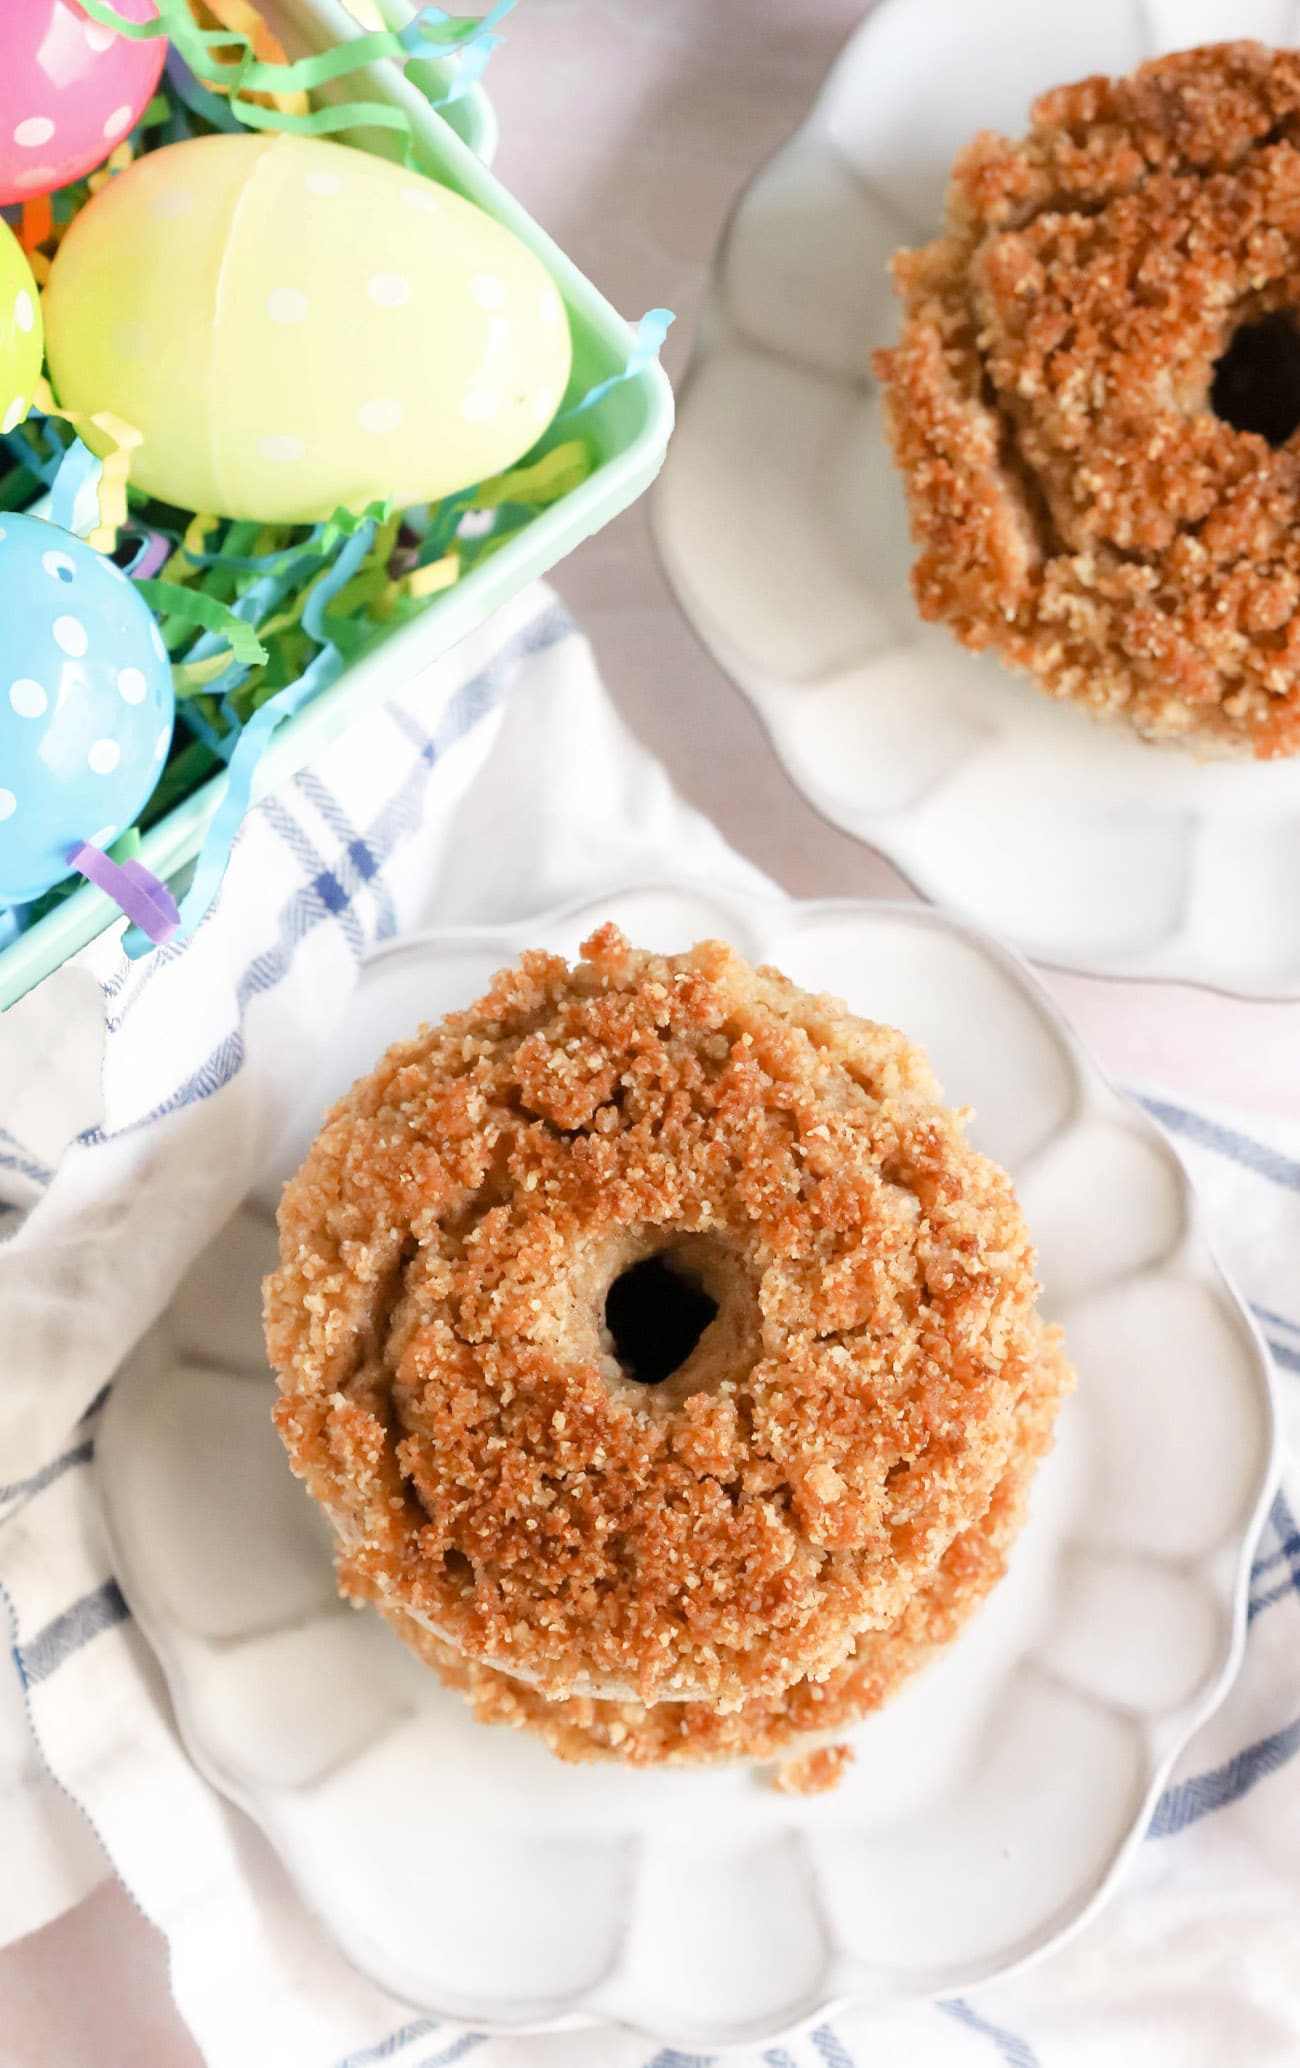 These easy Baked Crumb Donuts are rich, sweet, full of vanilla flavor, and a coffee cake-like crumb topping. Every bite is buttery and satisfying. You'd never know these donuts are gluten free, high protein, high fiber, and low sugar!